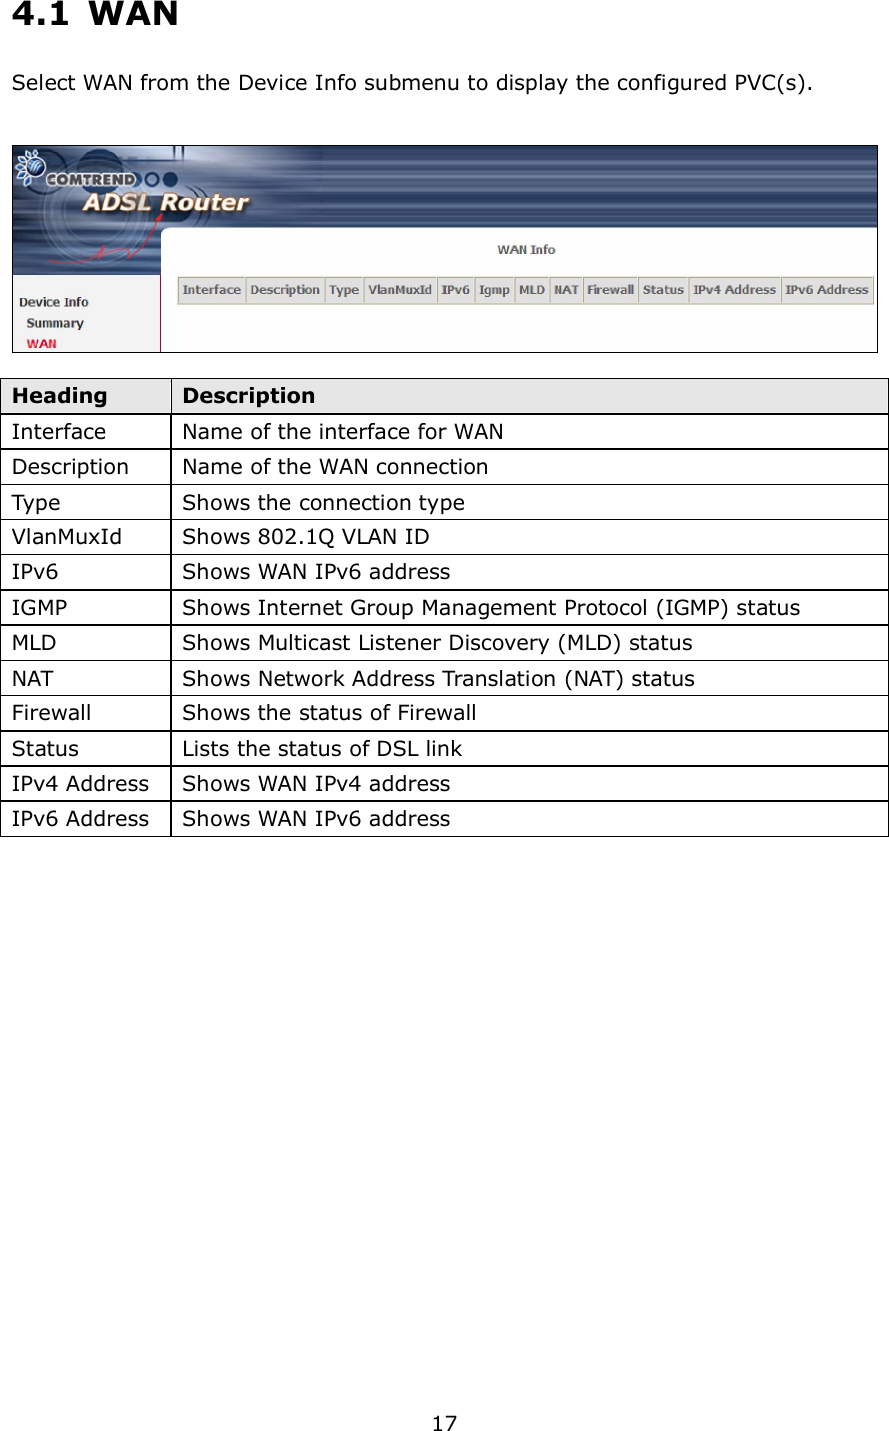  17 4.1  WAN Select WAN from the Device Info submenu to display the configured PVC(s).     Heading  Description Interface    Name of the interface for WAN Description  Name of the WAN connection Type  Shows the connection type   VlanMuxId  Shows 802.1Q VLAN ID IPv6  Shows WAN IPv6 address IGMP  Shows Internet Group Management Protocol (IGMP) status MLD  Shows Multicast Listener Discovery (MLD) status NAT  Shows Network Address Translation (NAT) status Firewall  Shows the status of Firewall Status  Lists the status of DSL link IPv4 Address  Shows WAN IPv4 address IPv6 Address  Shows WAN IPv6 address              